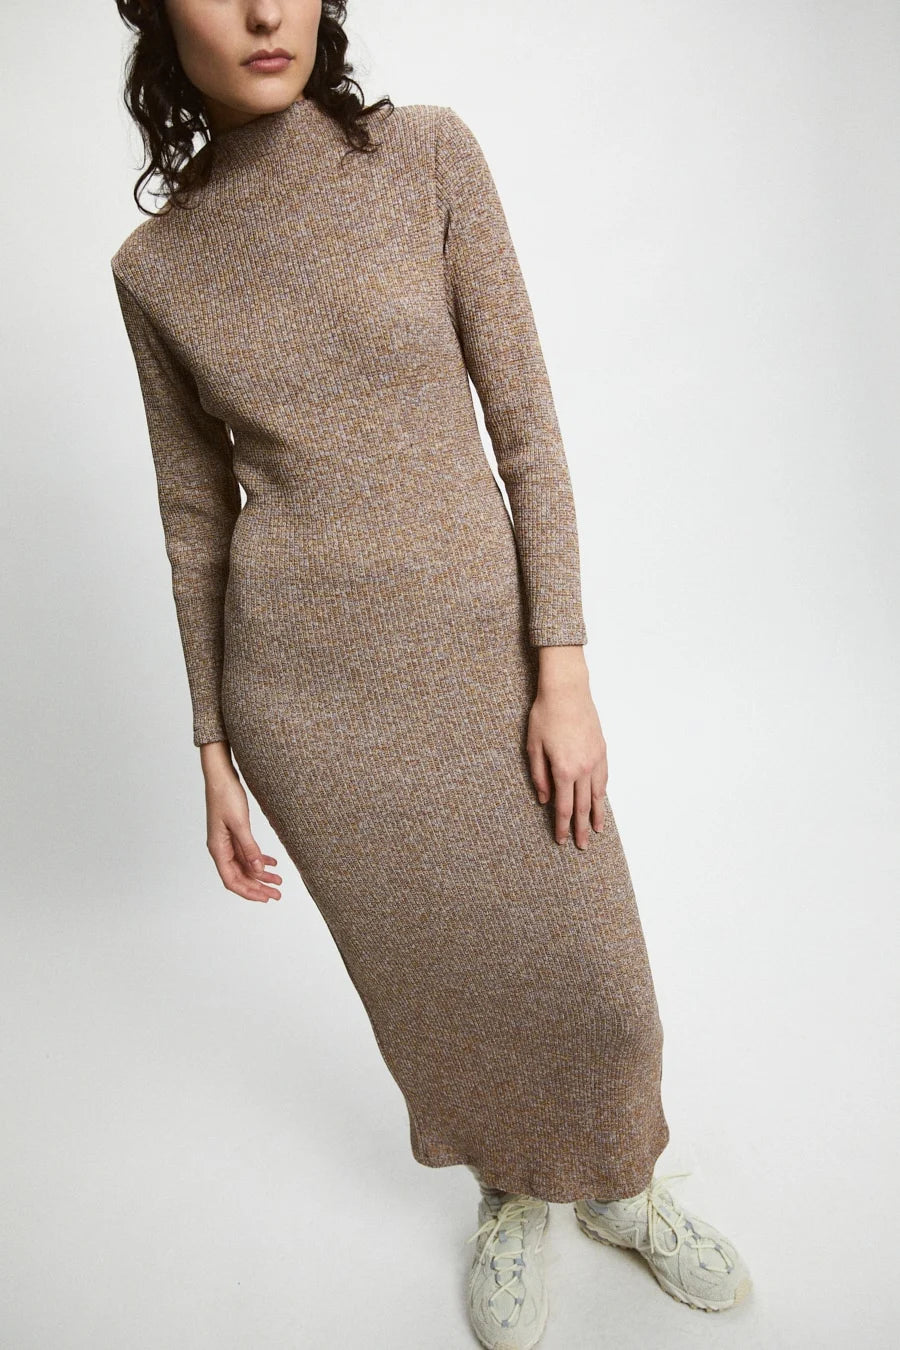 Diorn Knitted Dress